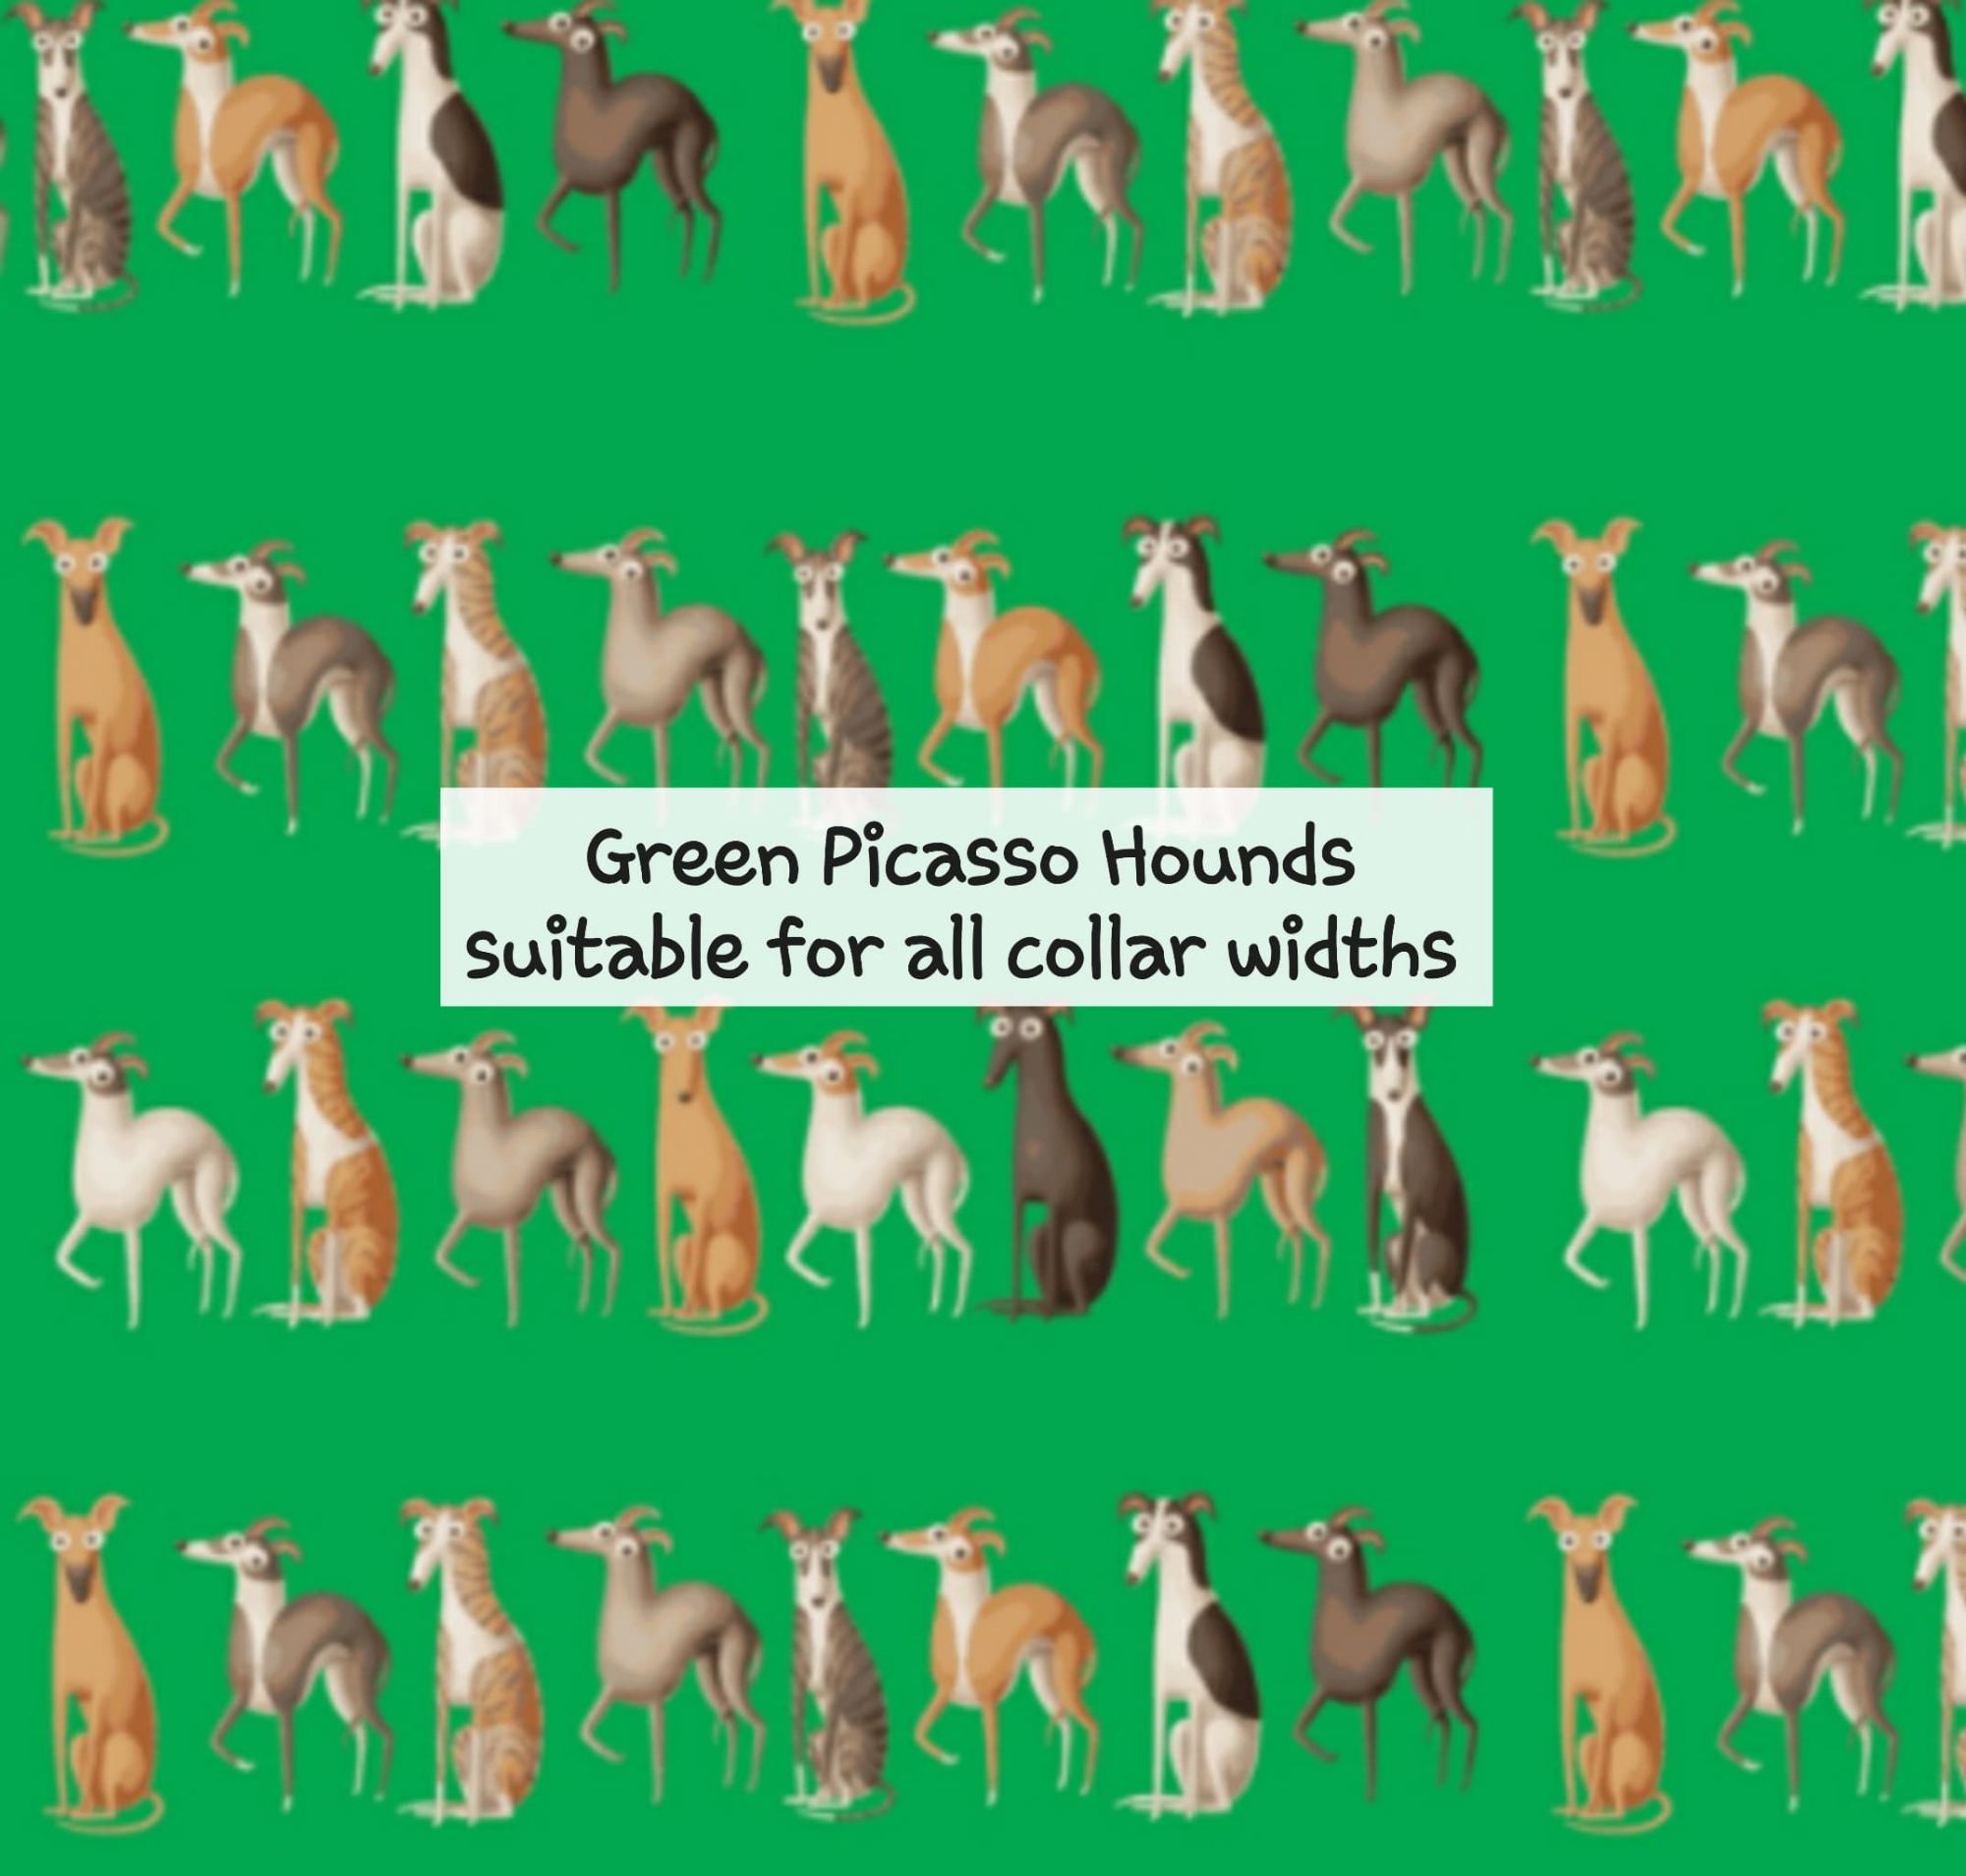 Green Picasso Hounds